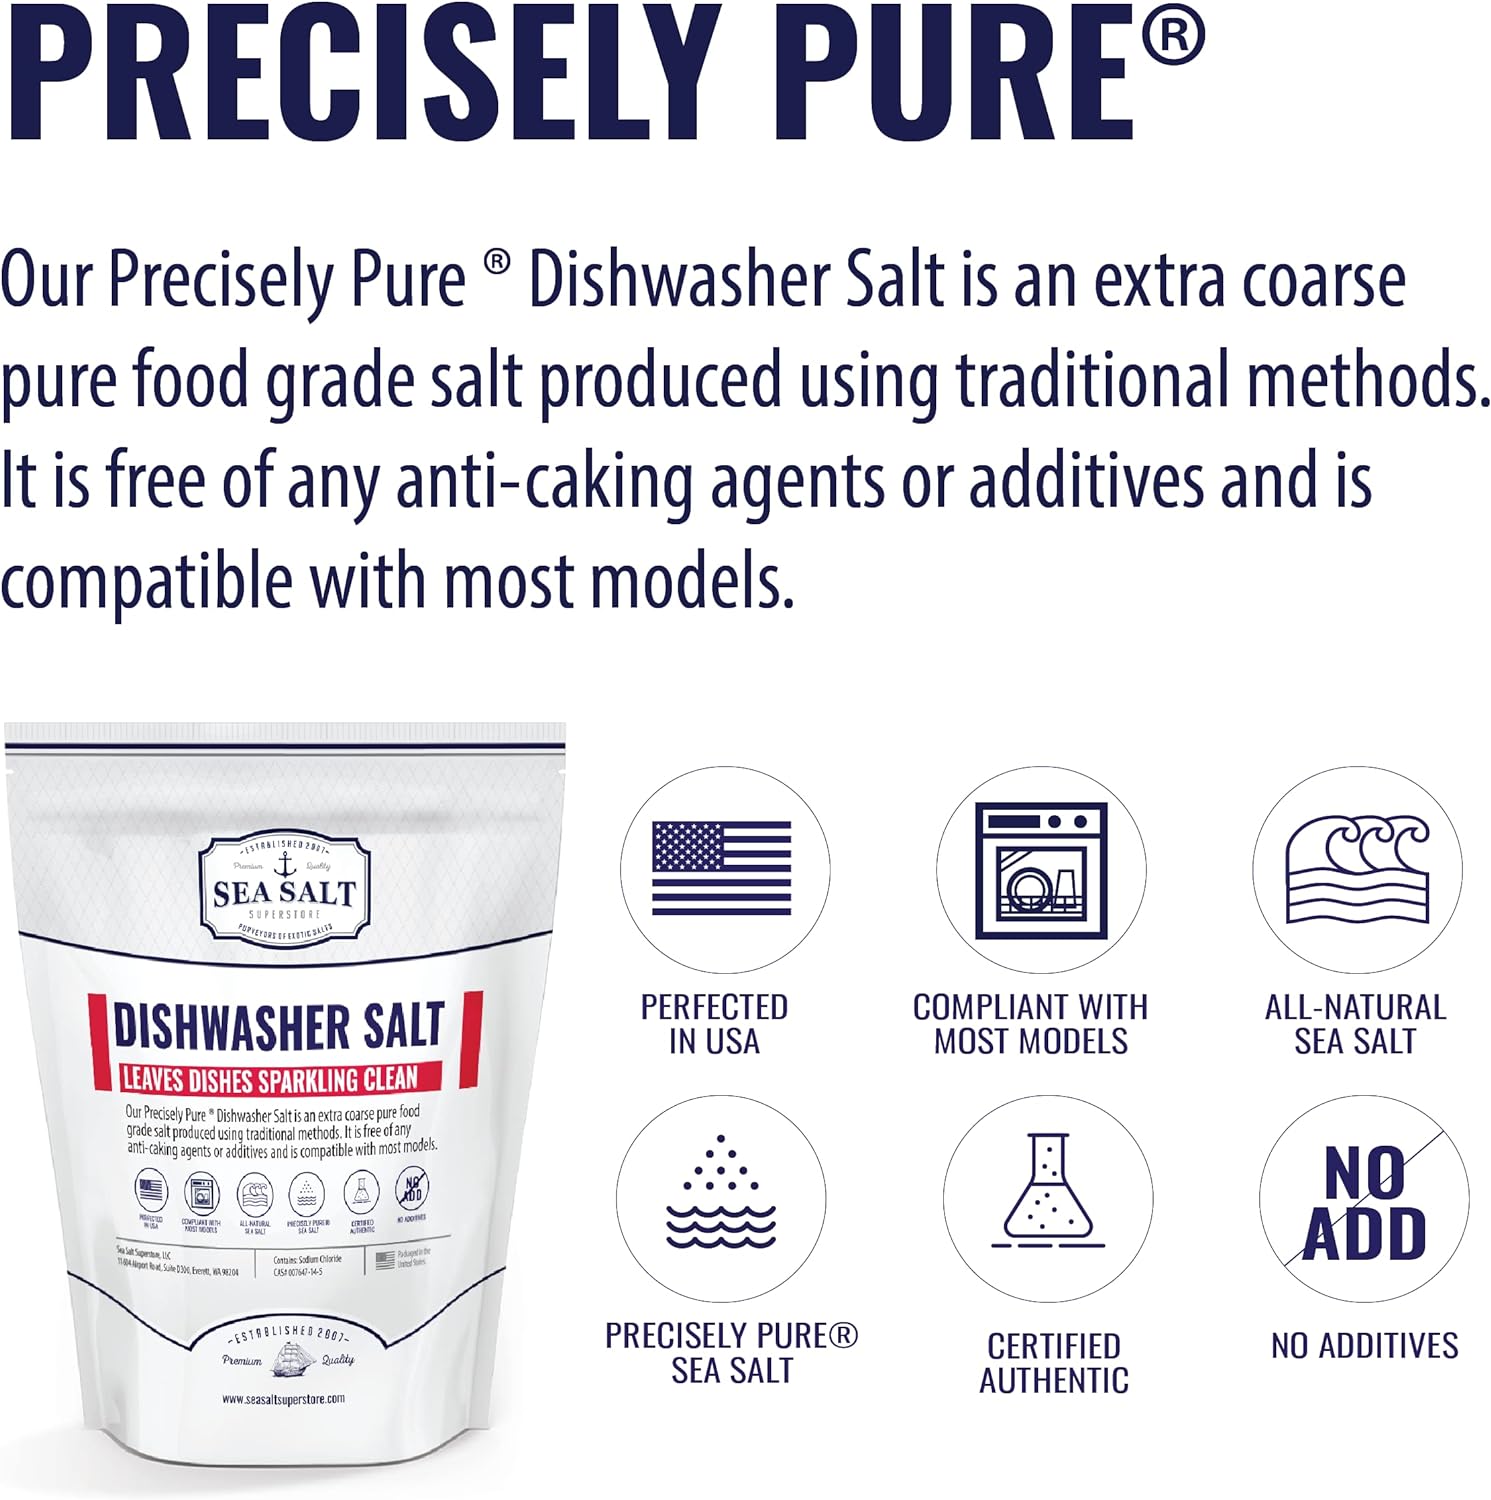 Dishwasher Salt - All-Natural Water Softener Salt for a Clean Finish - Compatible with Bosch, Miele, Thermador, Whirlpool Dishwashers and More - Food-Grade Coarse Sea Salt (5 lb Bag)